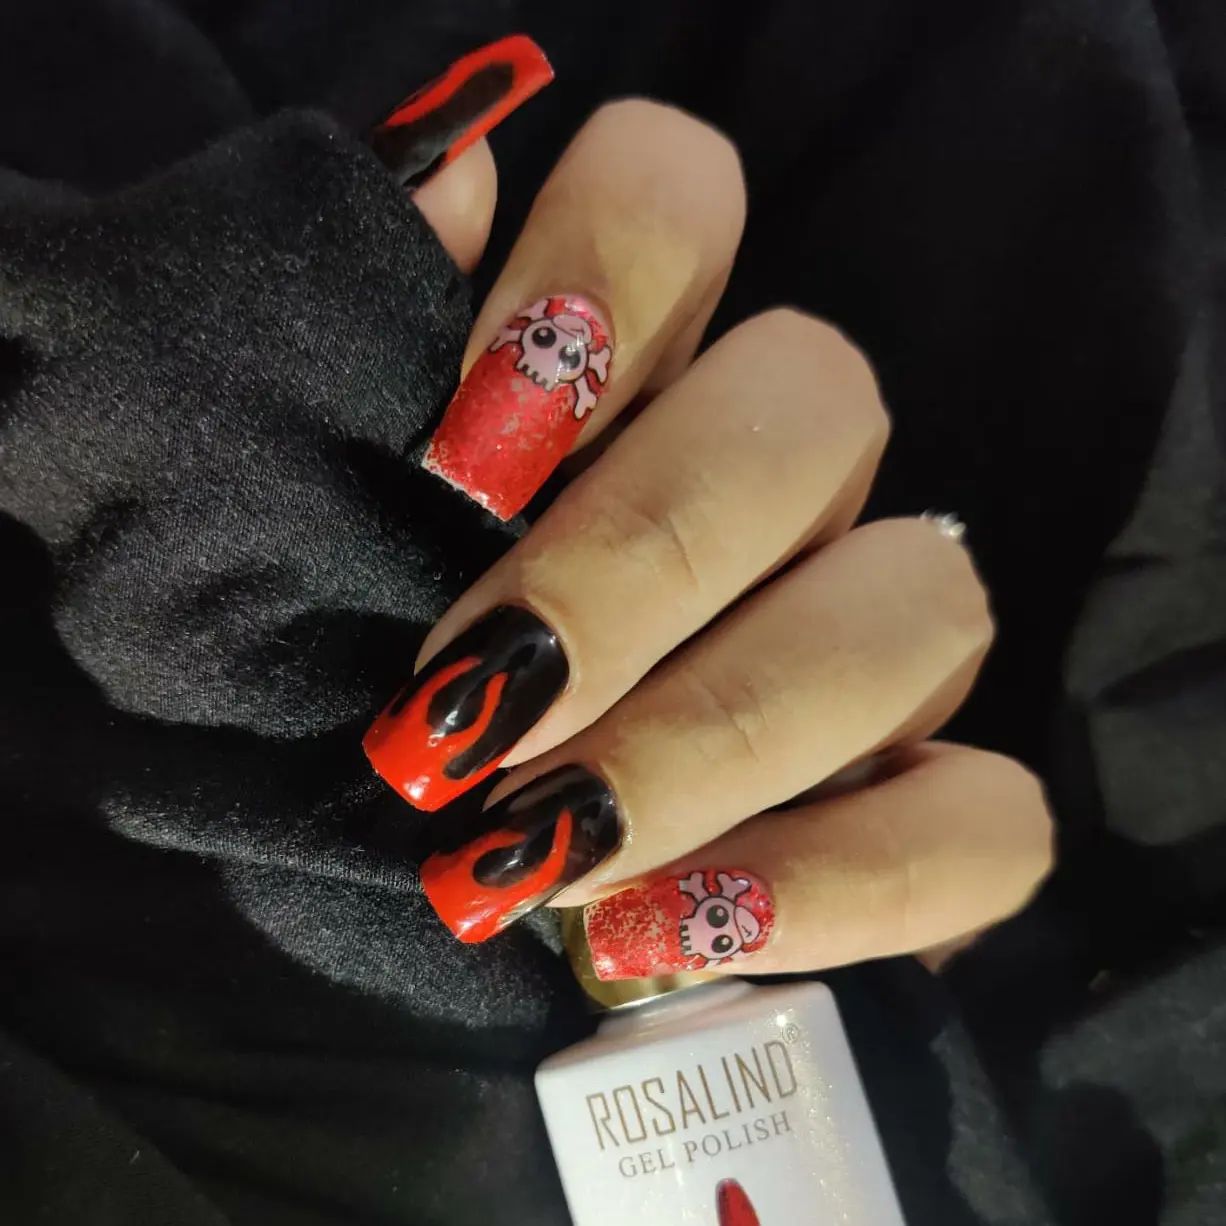 Here is a black and red nail combo that sparkles. These nails can be a nice option for Halloween, too since it includes skull faces for accent nails. You will feel sexy with these for sure.